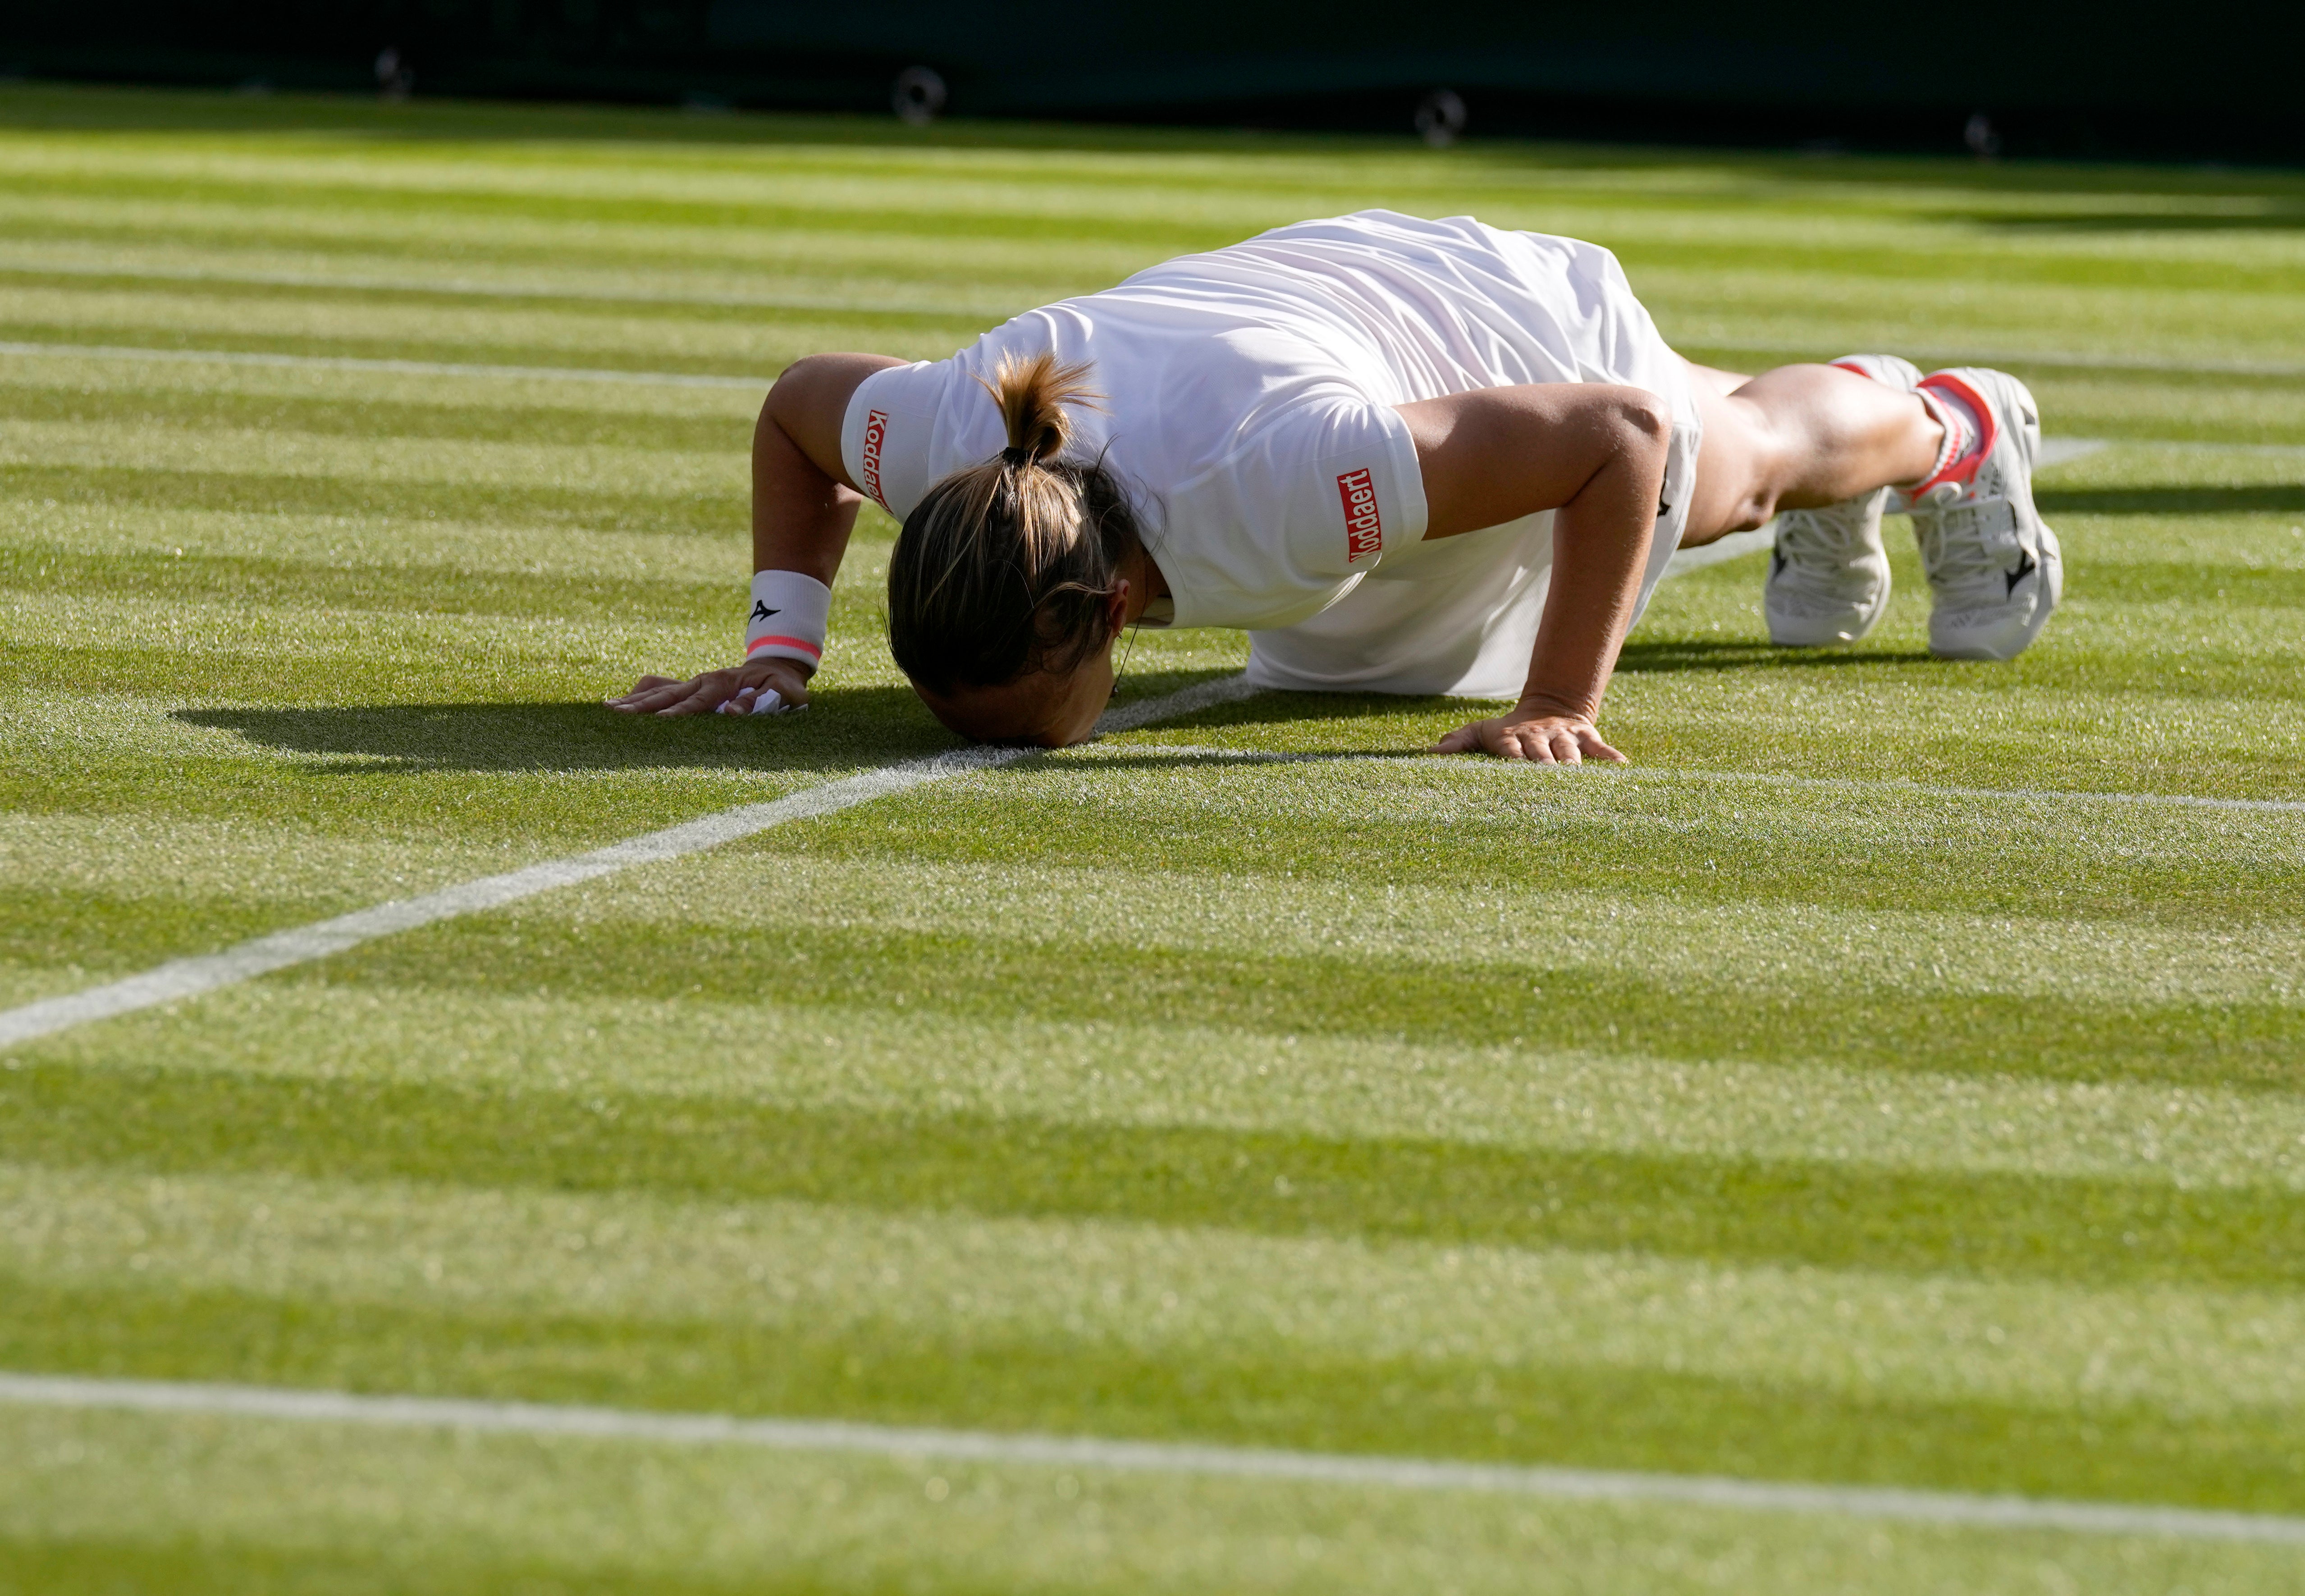 Kirsten Flipkens kisses the grass on Court Two at the end of her second round match with Simona Halep, which marked the end of her professional singles career (Alastair Grant/AP/PA)